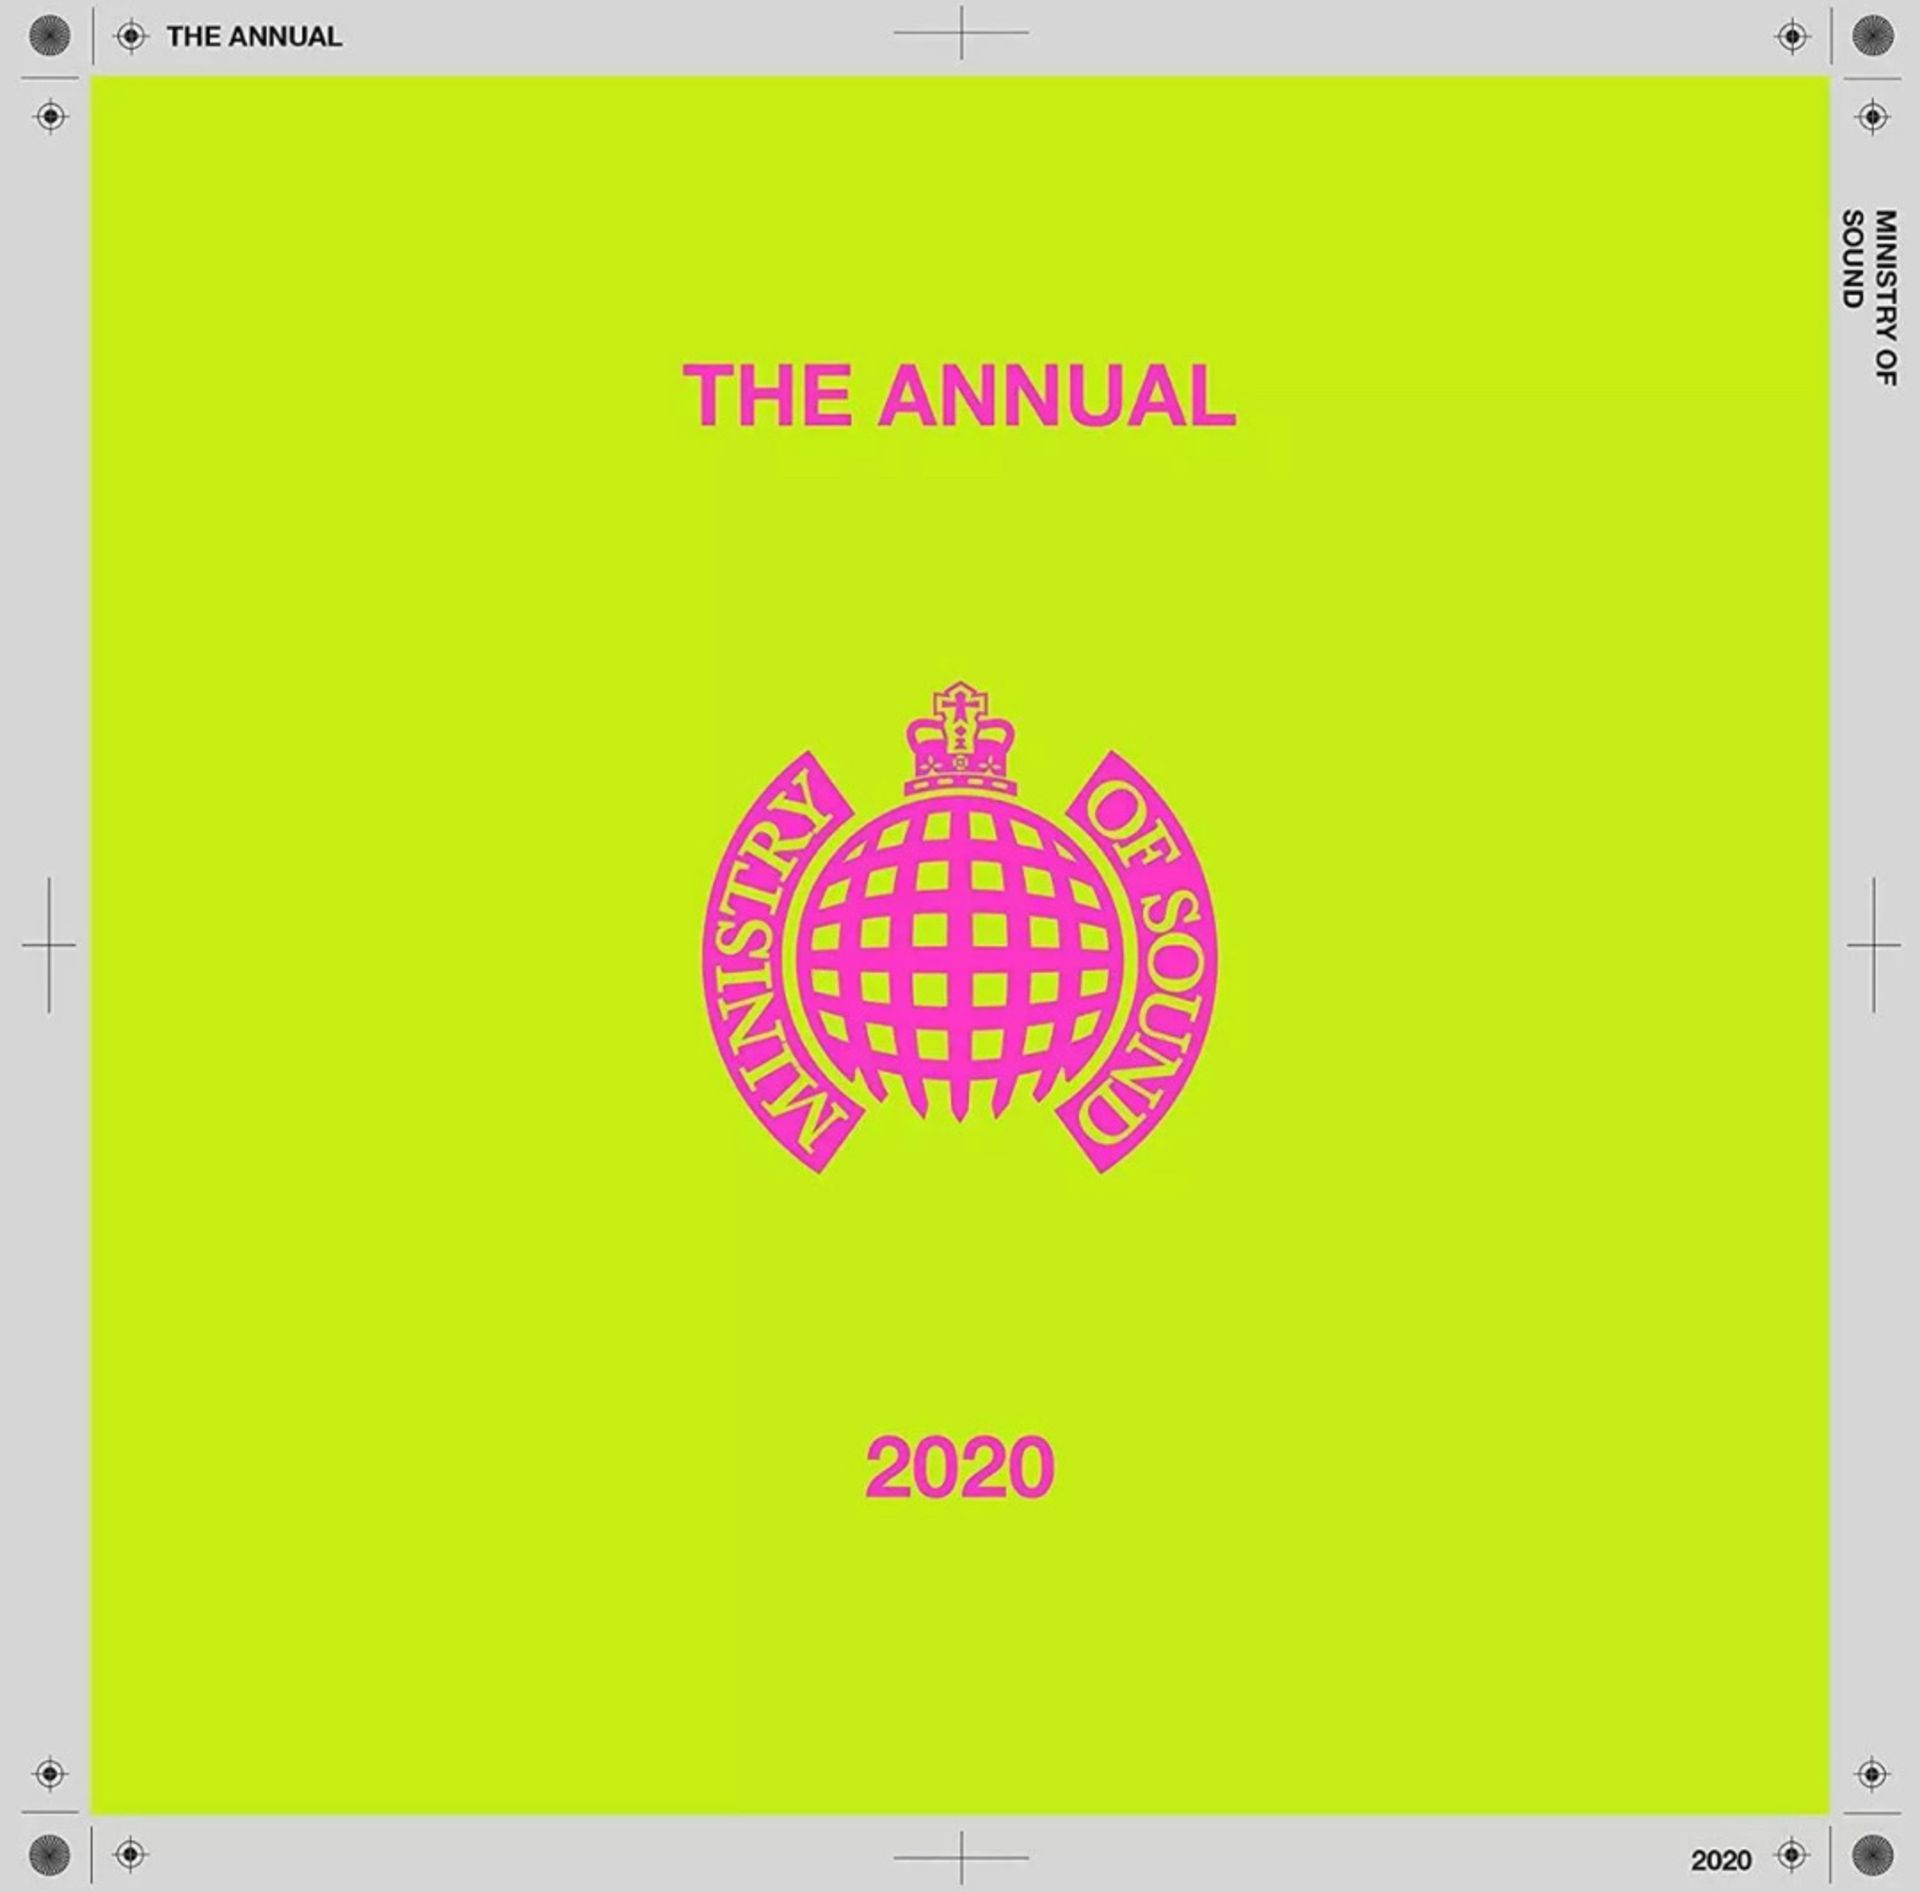 8 x Ministry of Sound - The Annual 2020 - 2 CD - NEW STOCK - Image 2 of 2